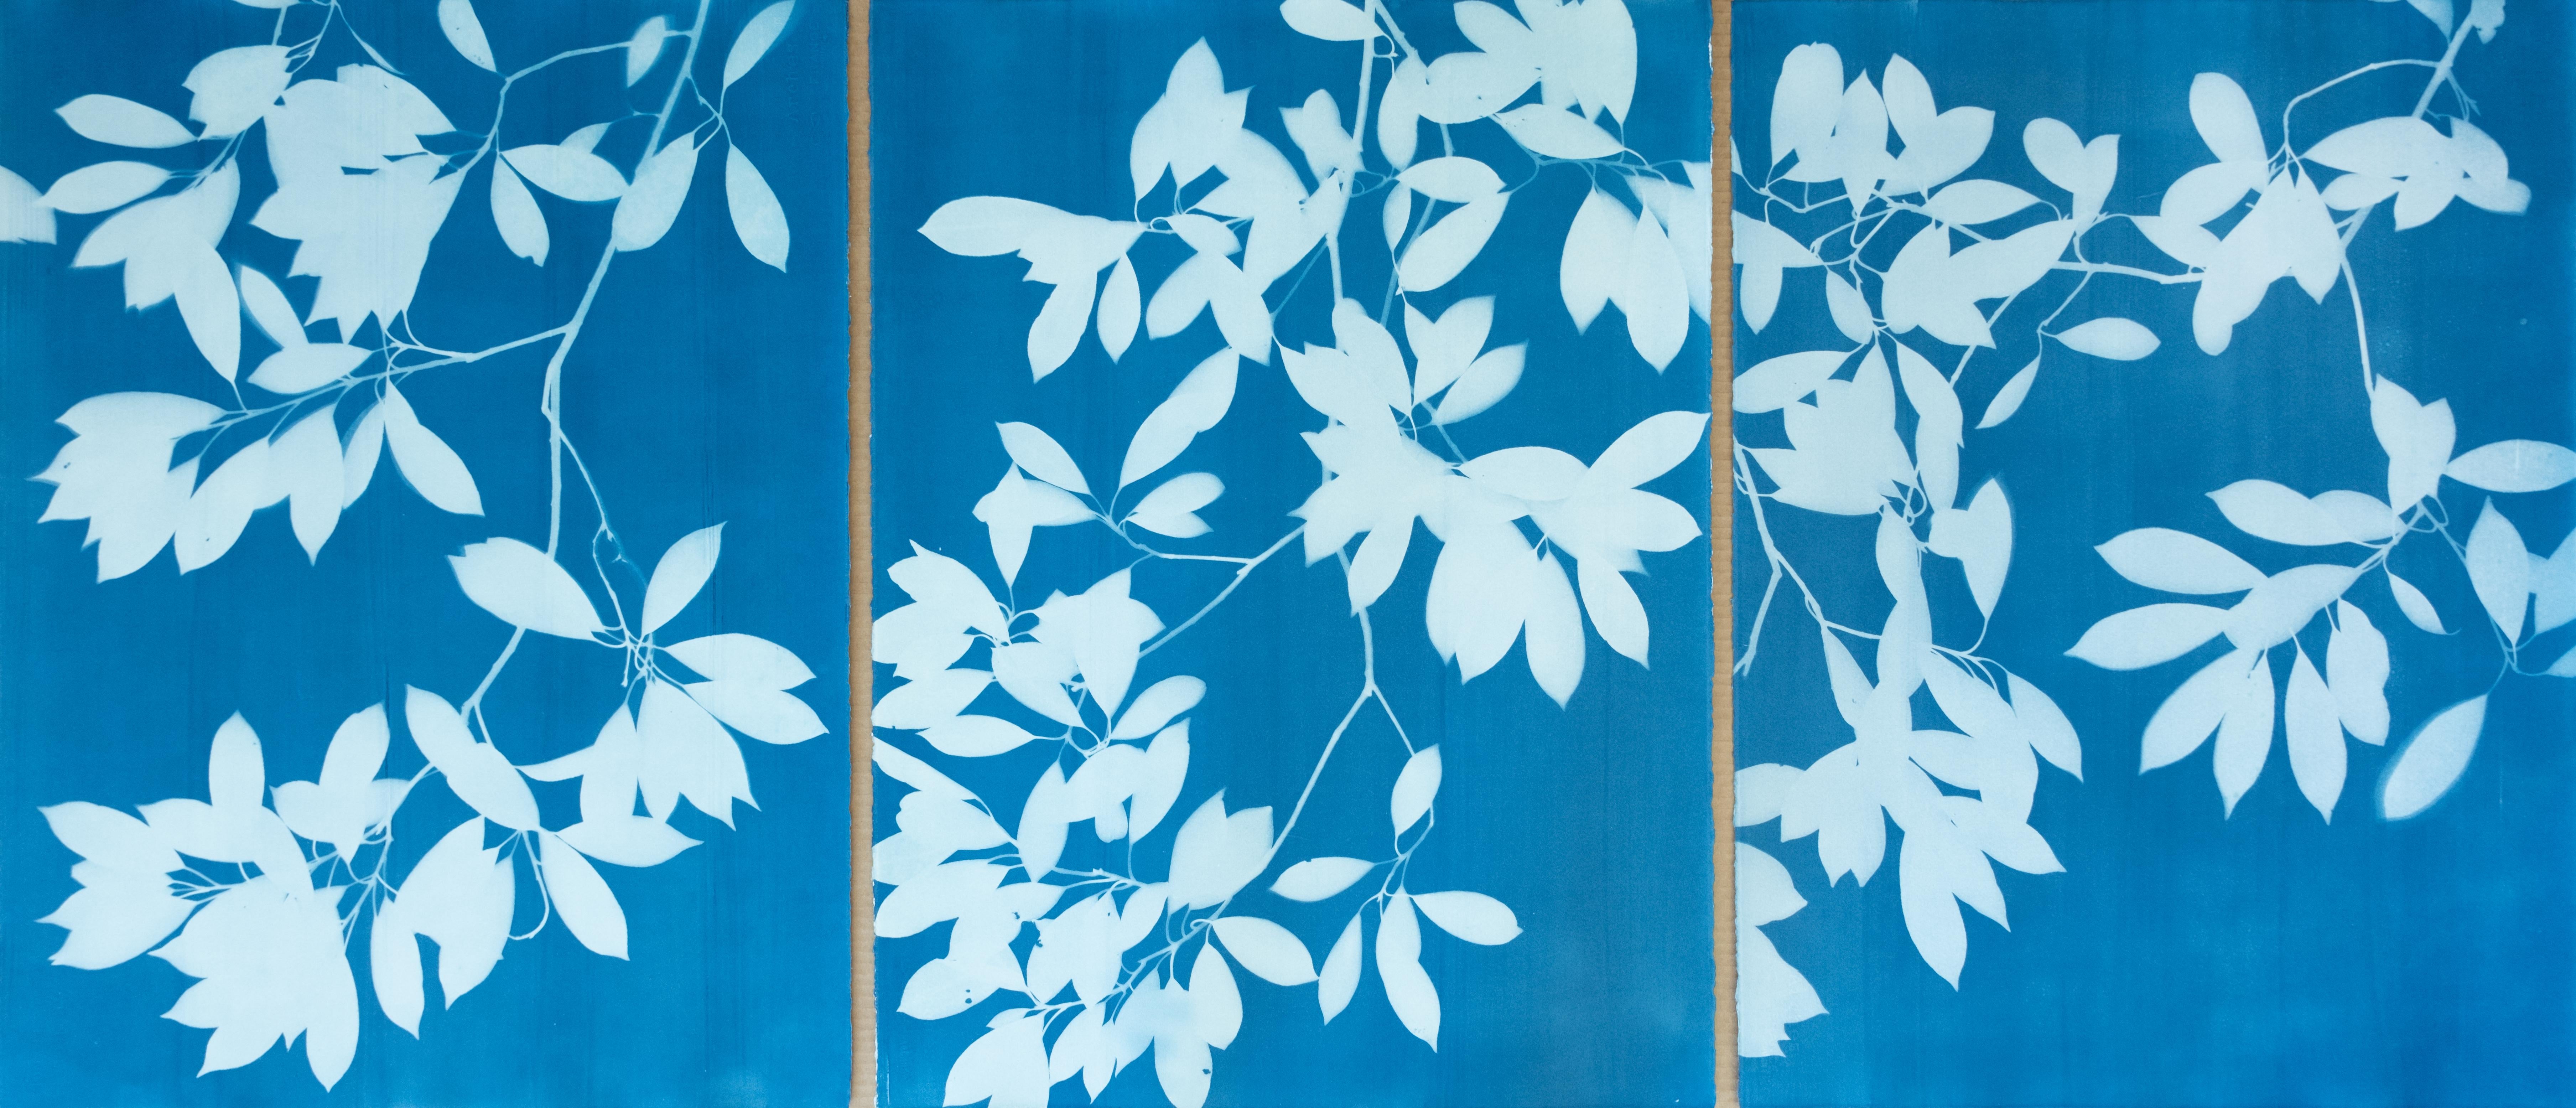 Christine So Still-Life Print - Evening Shade Triptych (3 hand-printed botanical cyanotypes, 30 x 22 in. each)